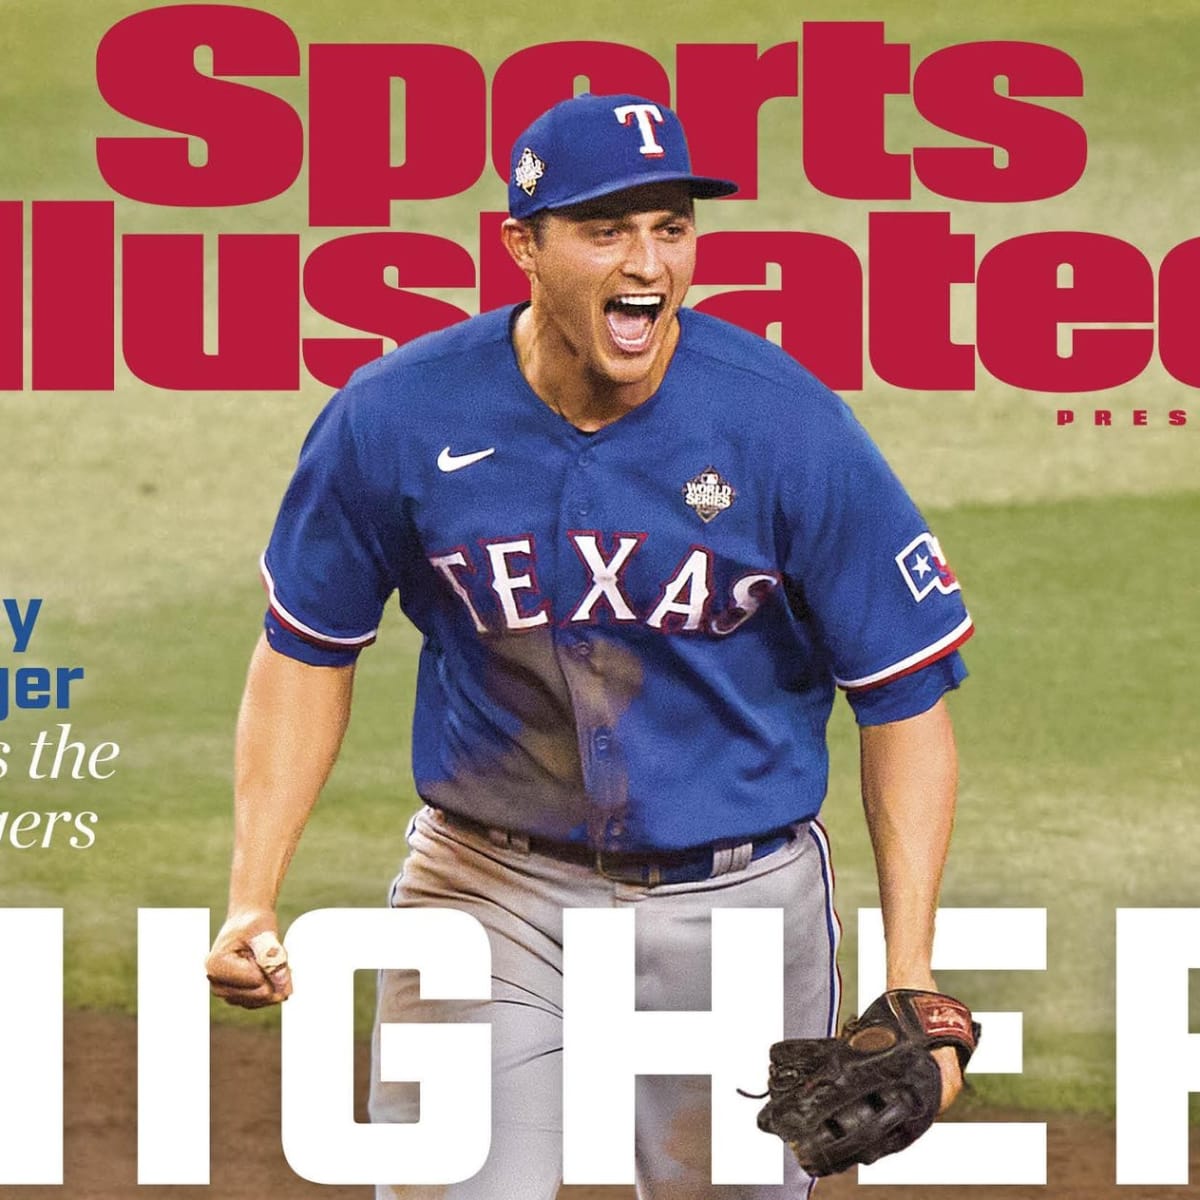 How to buy special edition Rangers World Series newspapers and